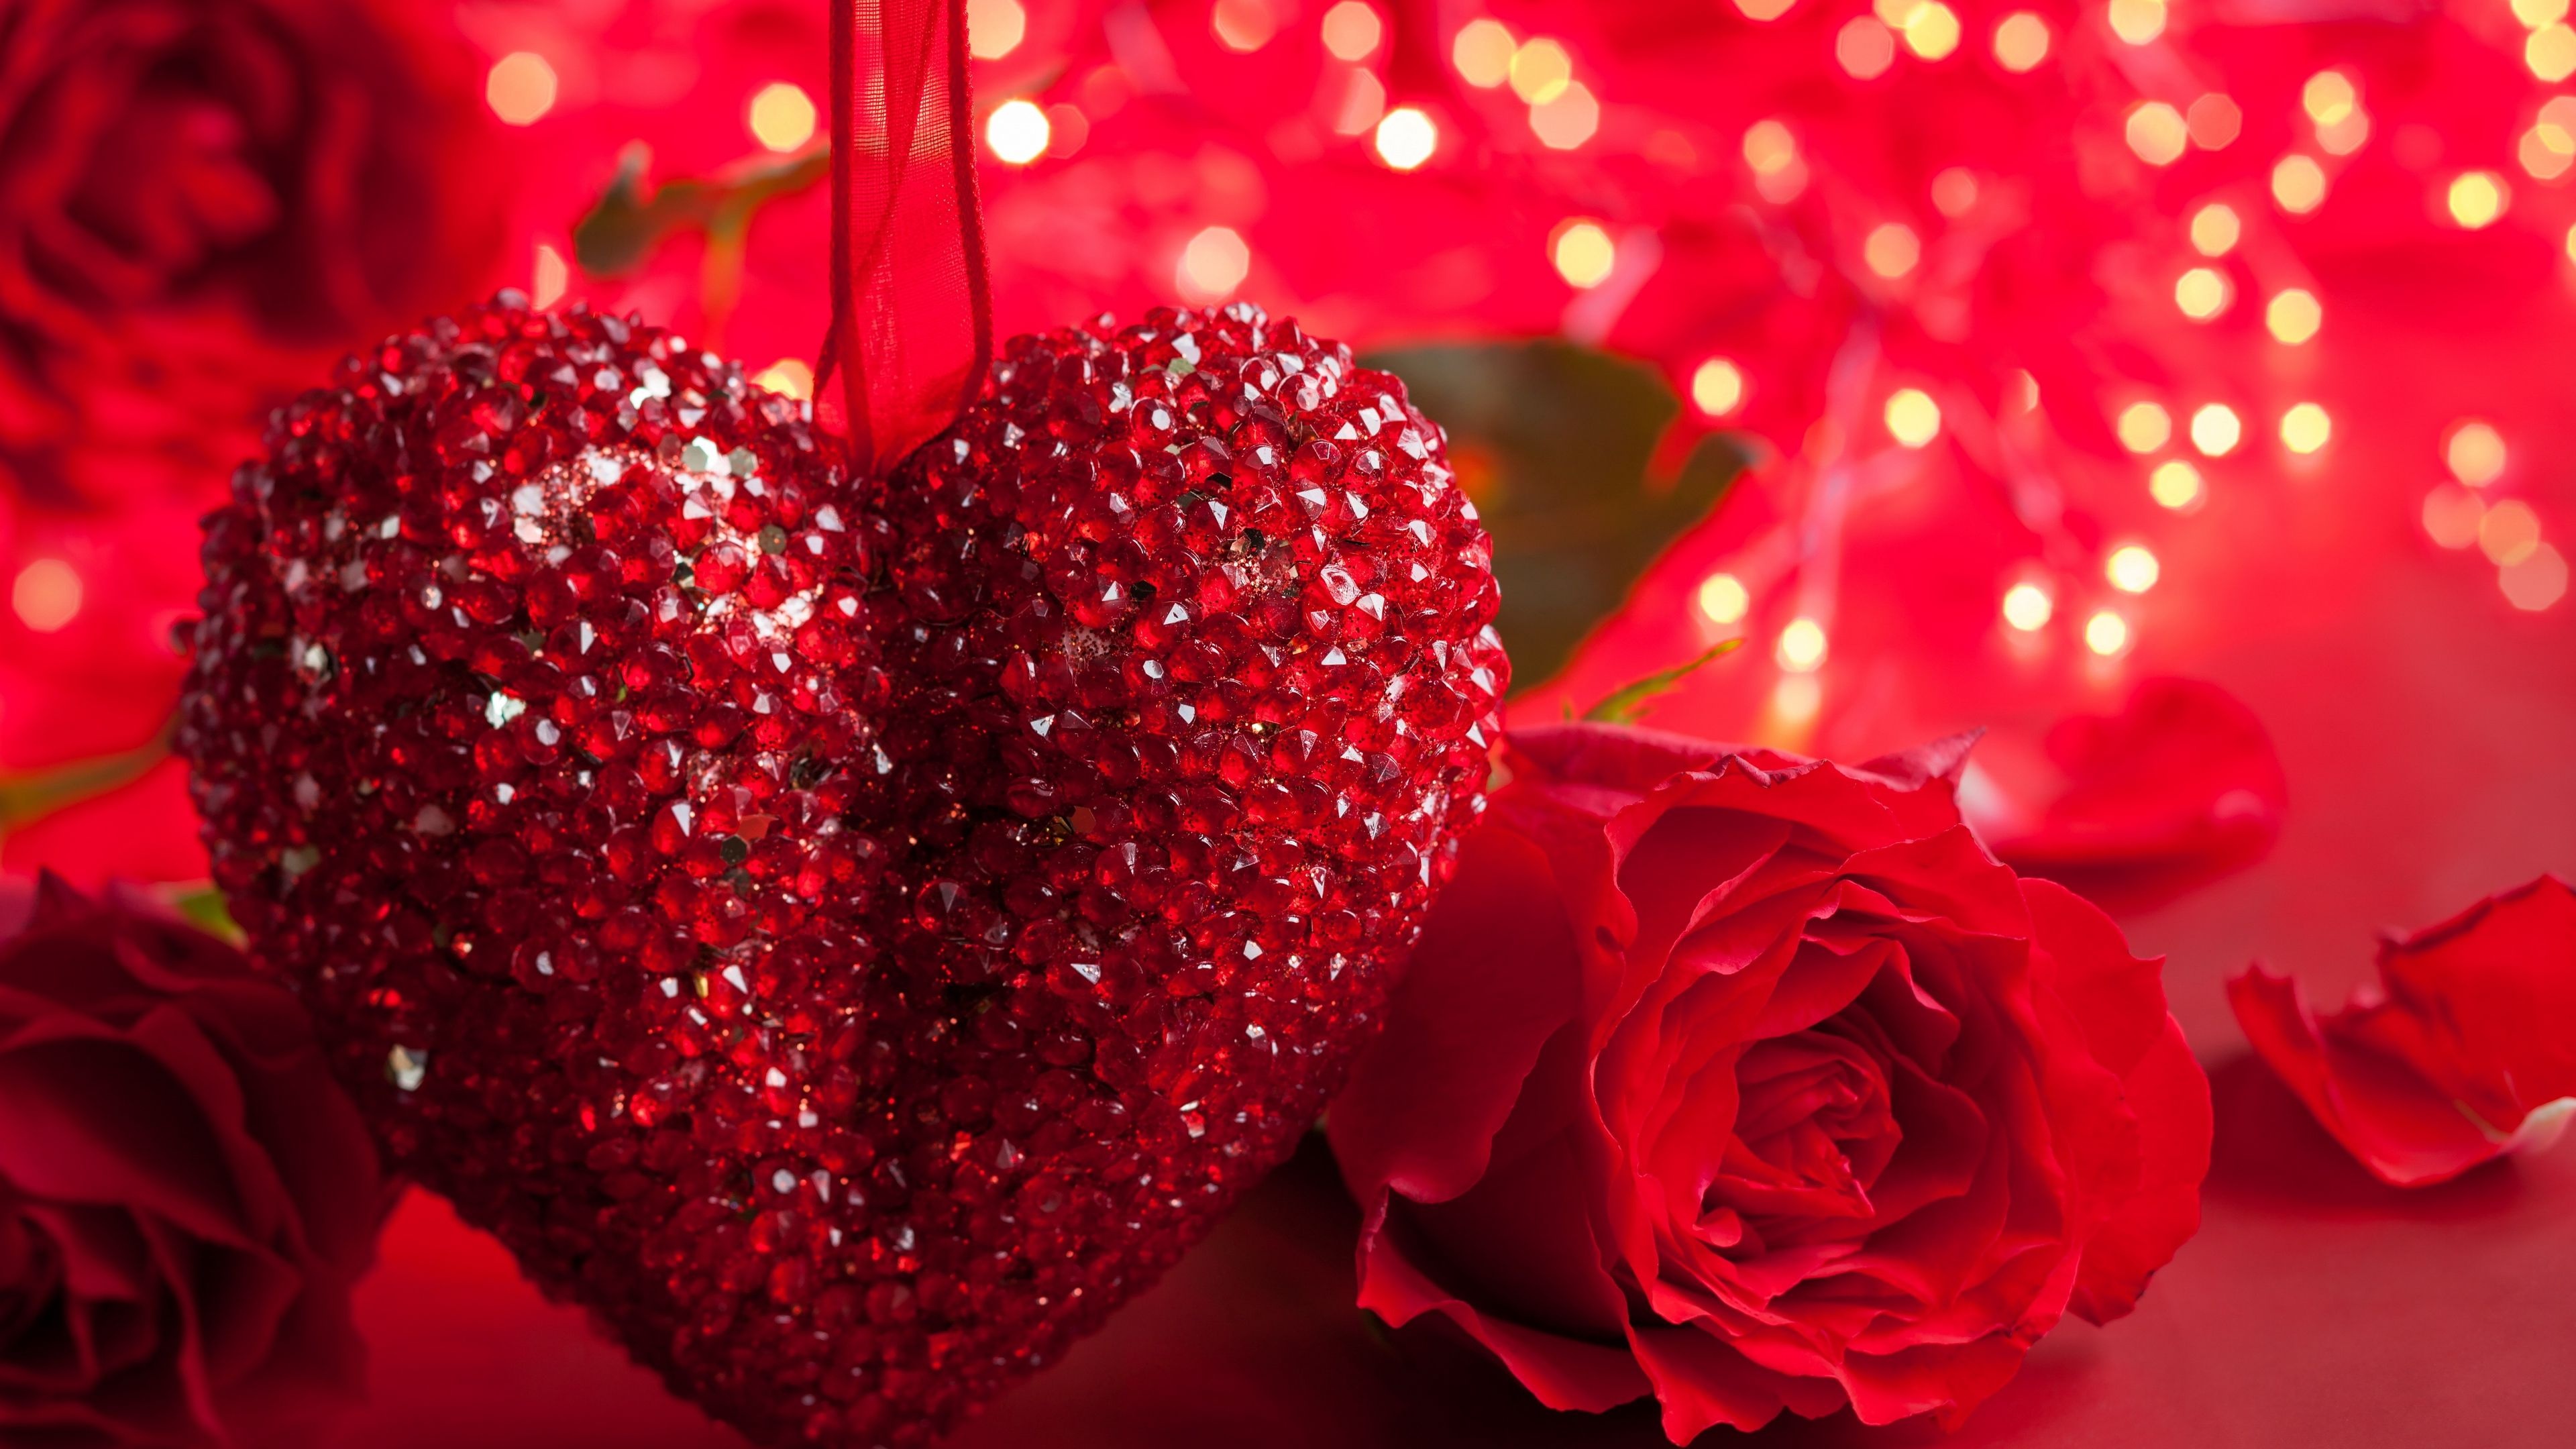 Hearts and Flowers, Valentine's Day, Rose and heart, Romantic love, 3840x2160 4K Desktop